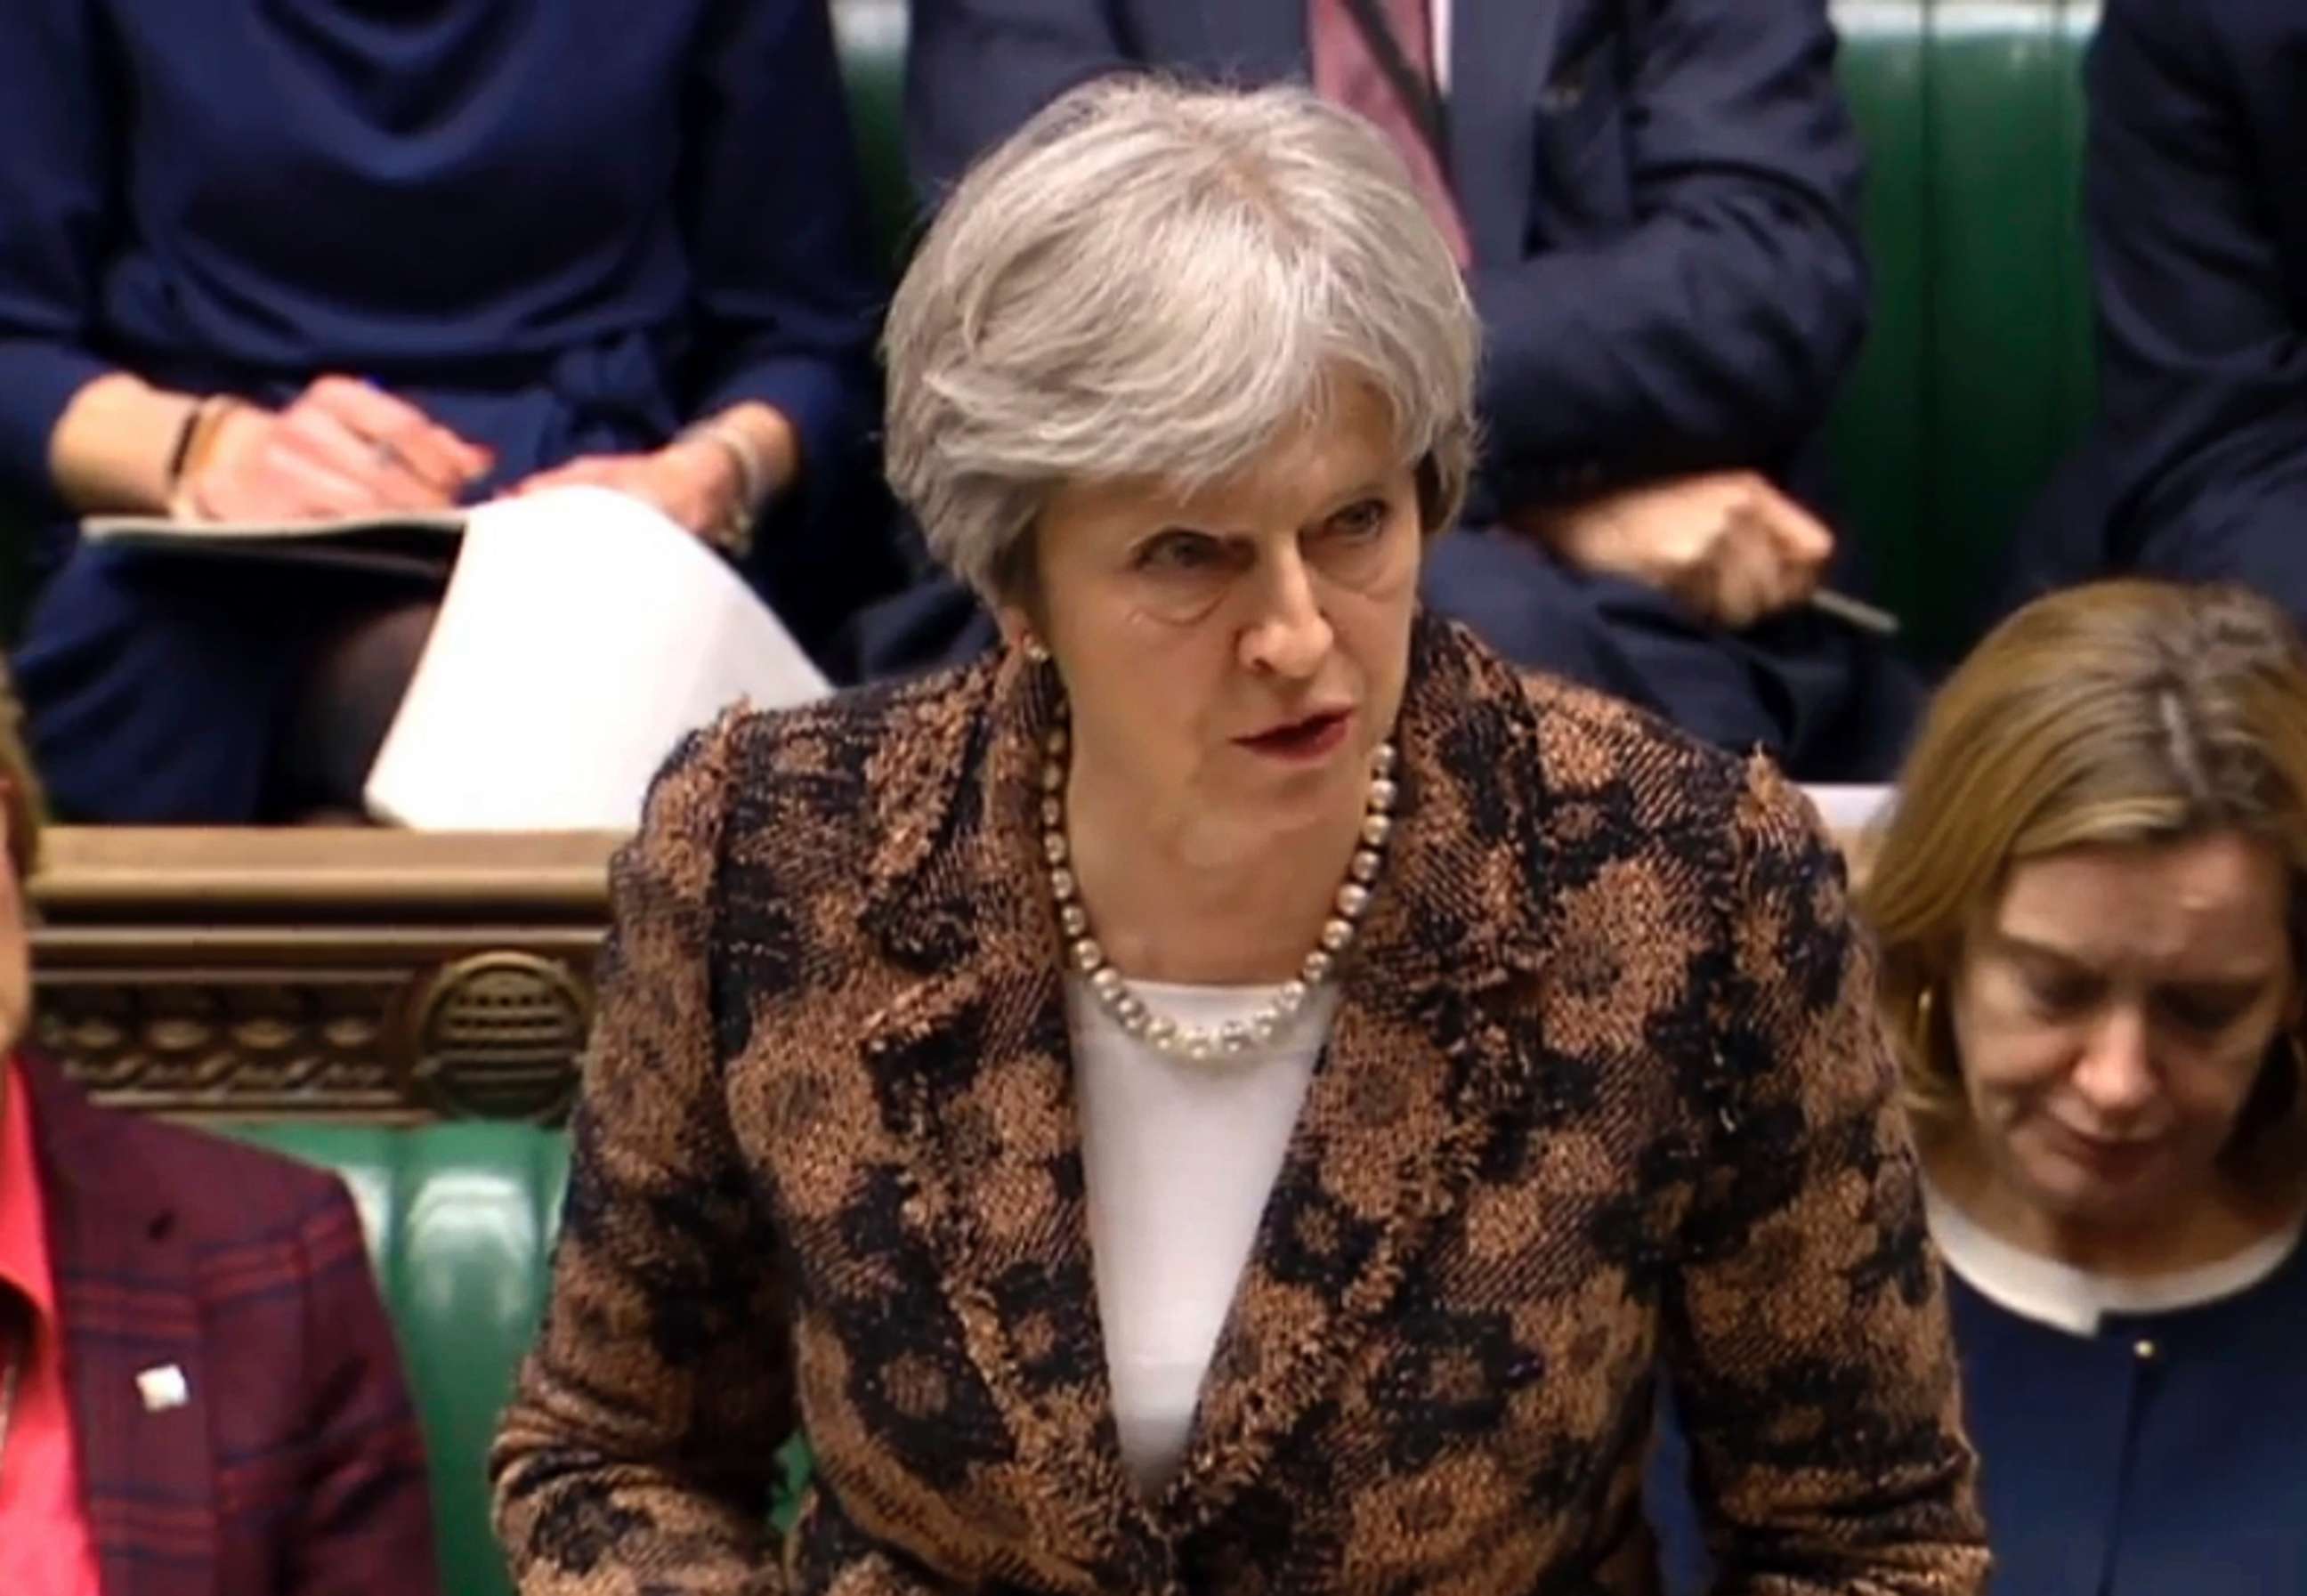 PHOTO: British Prime Minister Theresa May says her government has concluded it is "highly likely" Russia is responsible for the poisoning of an ex-spy, Sergei Skripal, and daughter Yulia who were exposed to a nerve agent known as Novichok, March 12, 2018.